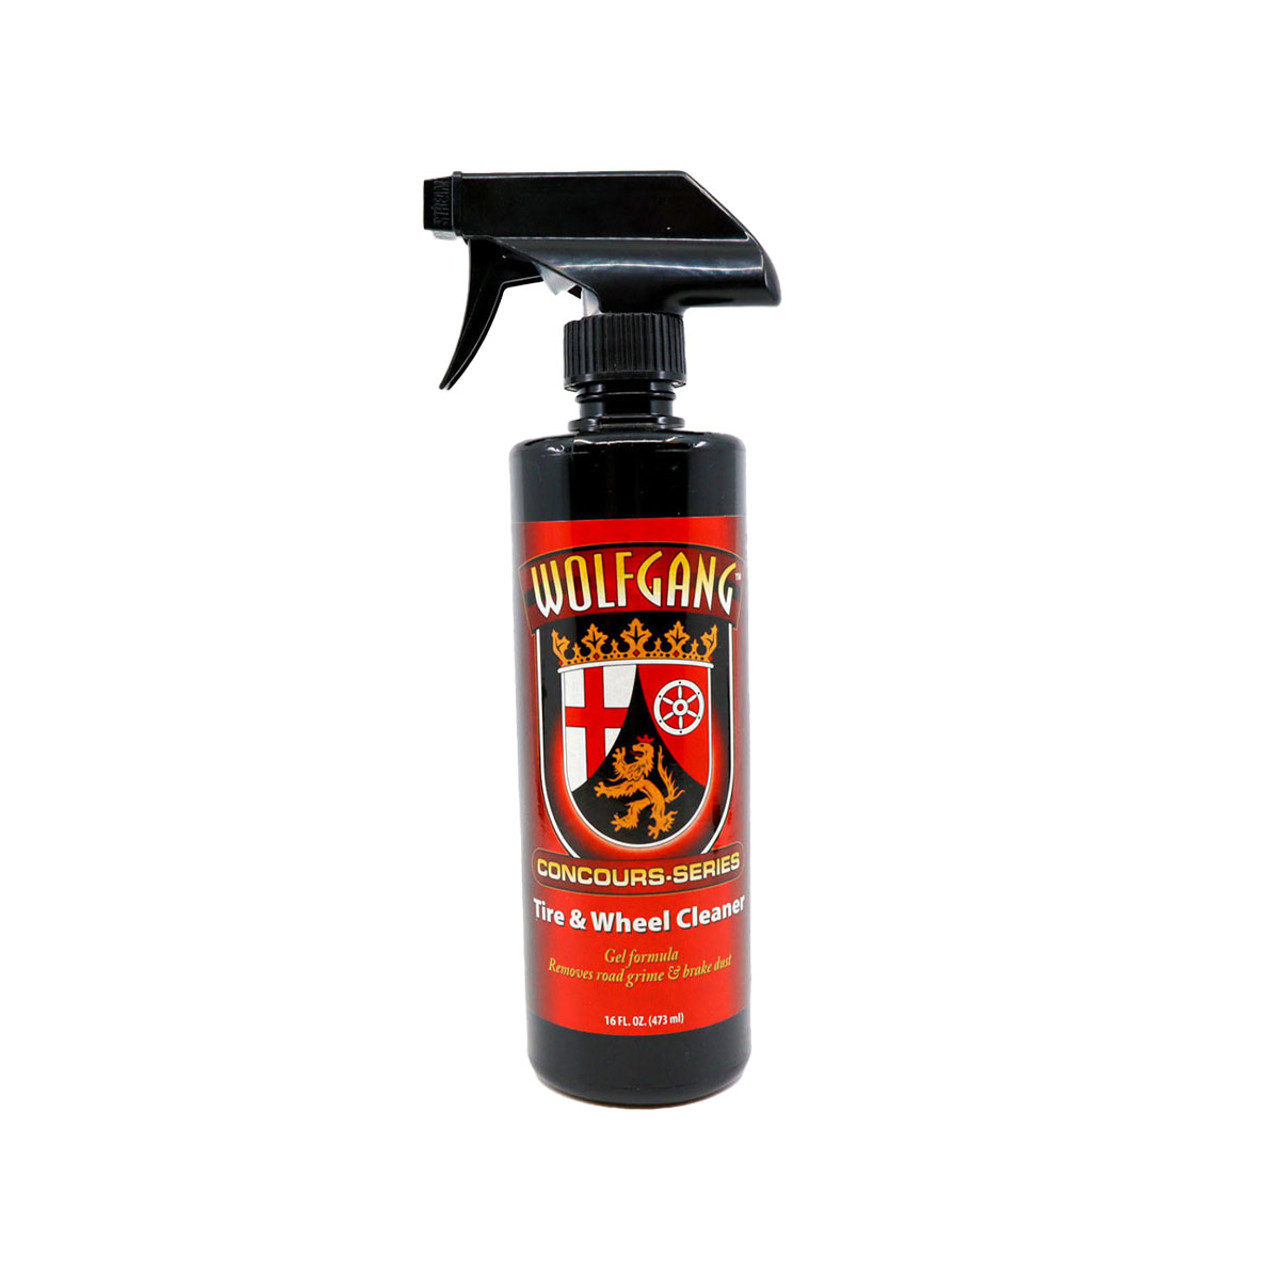 Wolfgang Tire & Wheel Cleaner 16 oz.